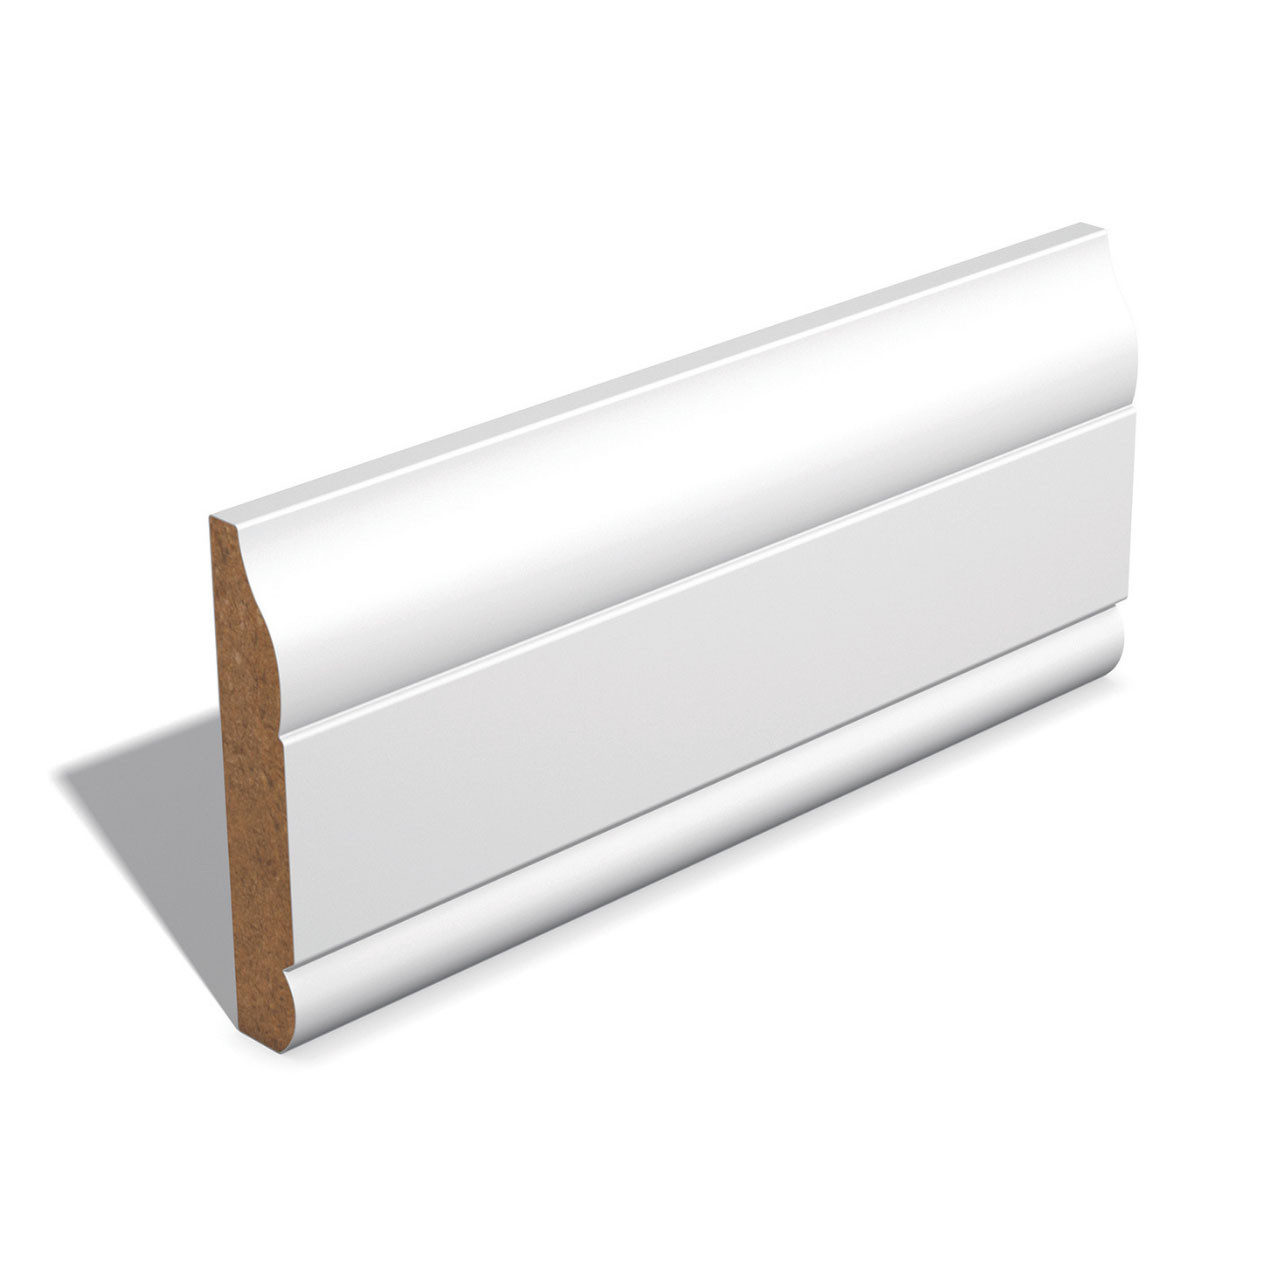 Photograph of Ogee & Bead MDF Facing Primed 18 x 69 x 5490mm